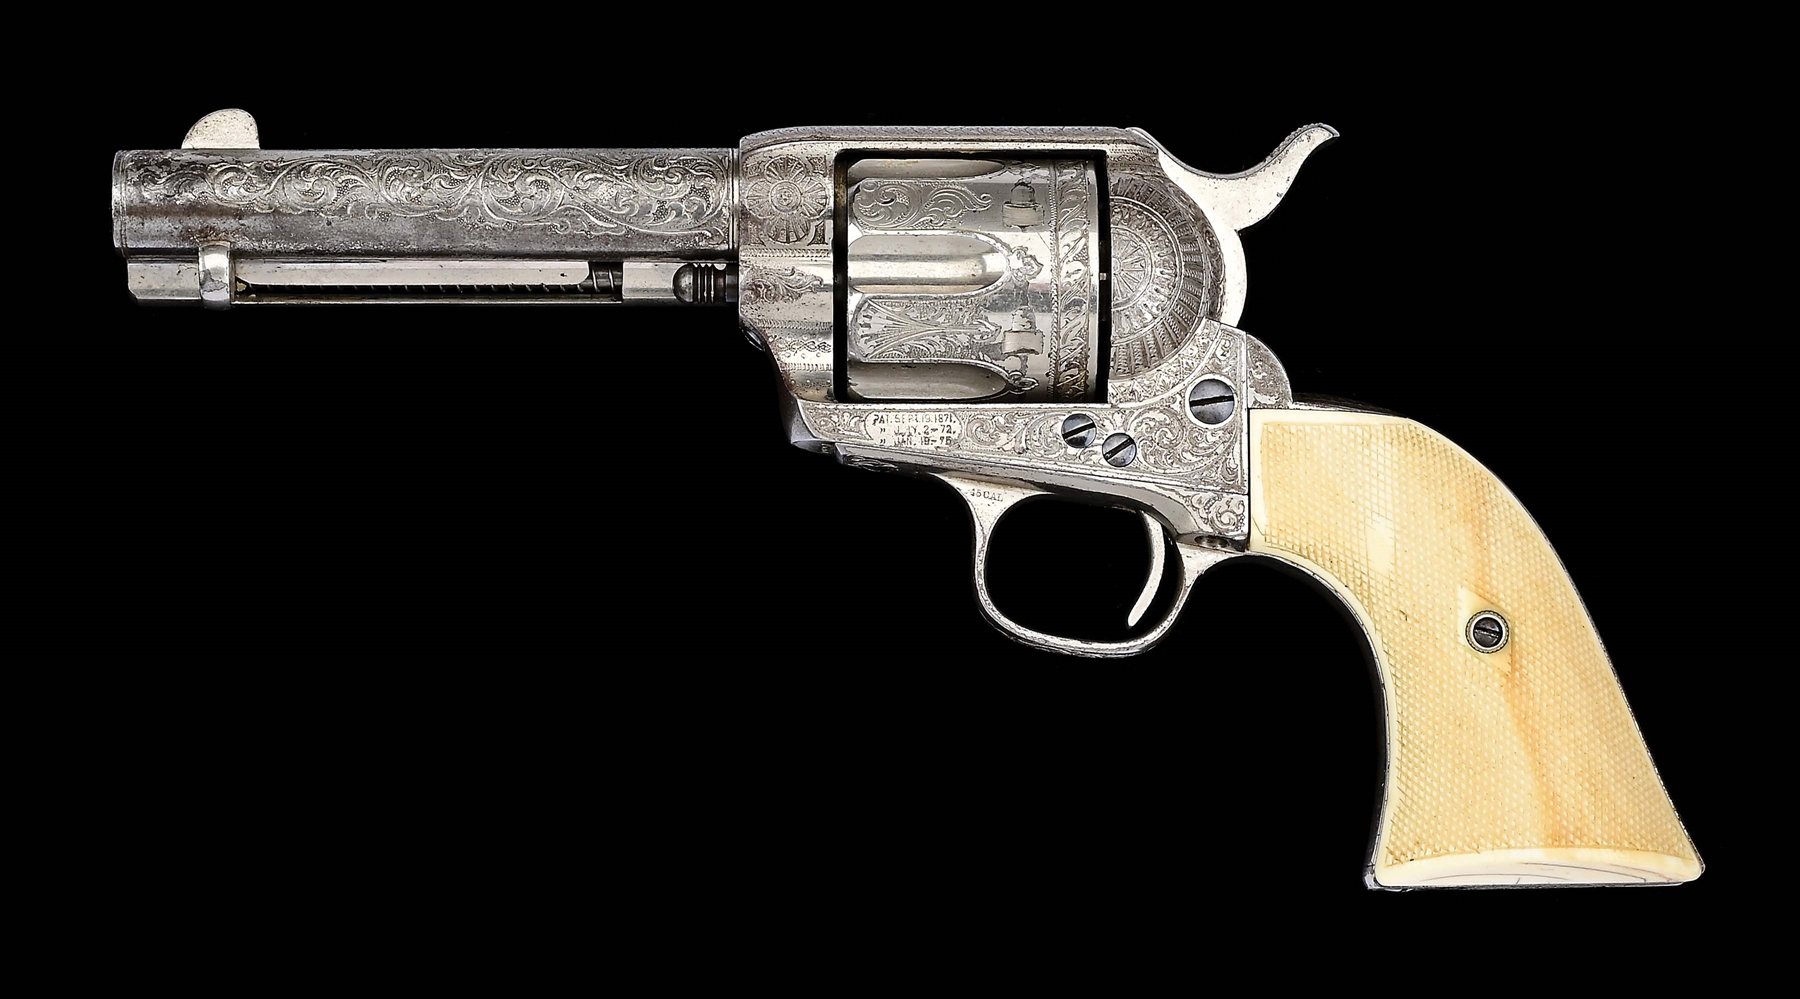 (A) SUPERB WESTERN SHIPPED COLT SINGLE ACTION ARMY WITH HELFRICHT ENGRAVING, CHECKERED IVORY GRIPS, AND FACTORY PRESENTATION TO L.P. BARTON, A SAN DIEGO POLICE OFFICER AND DETECTIVE IN SAN FRANCISCO